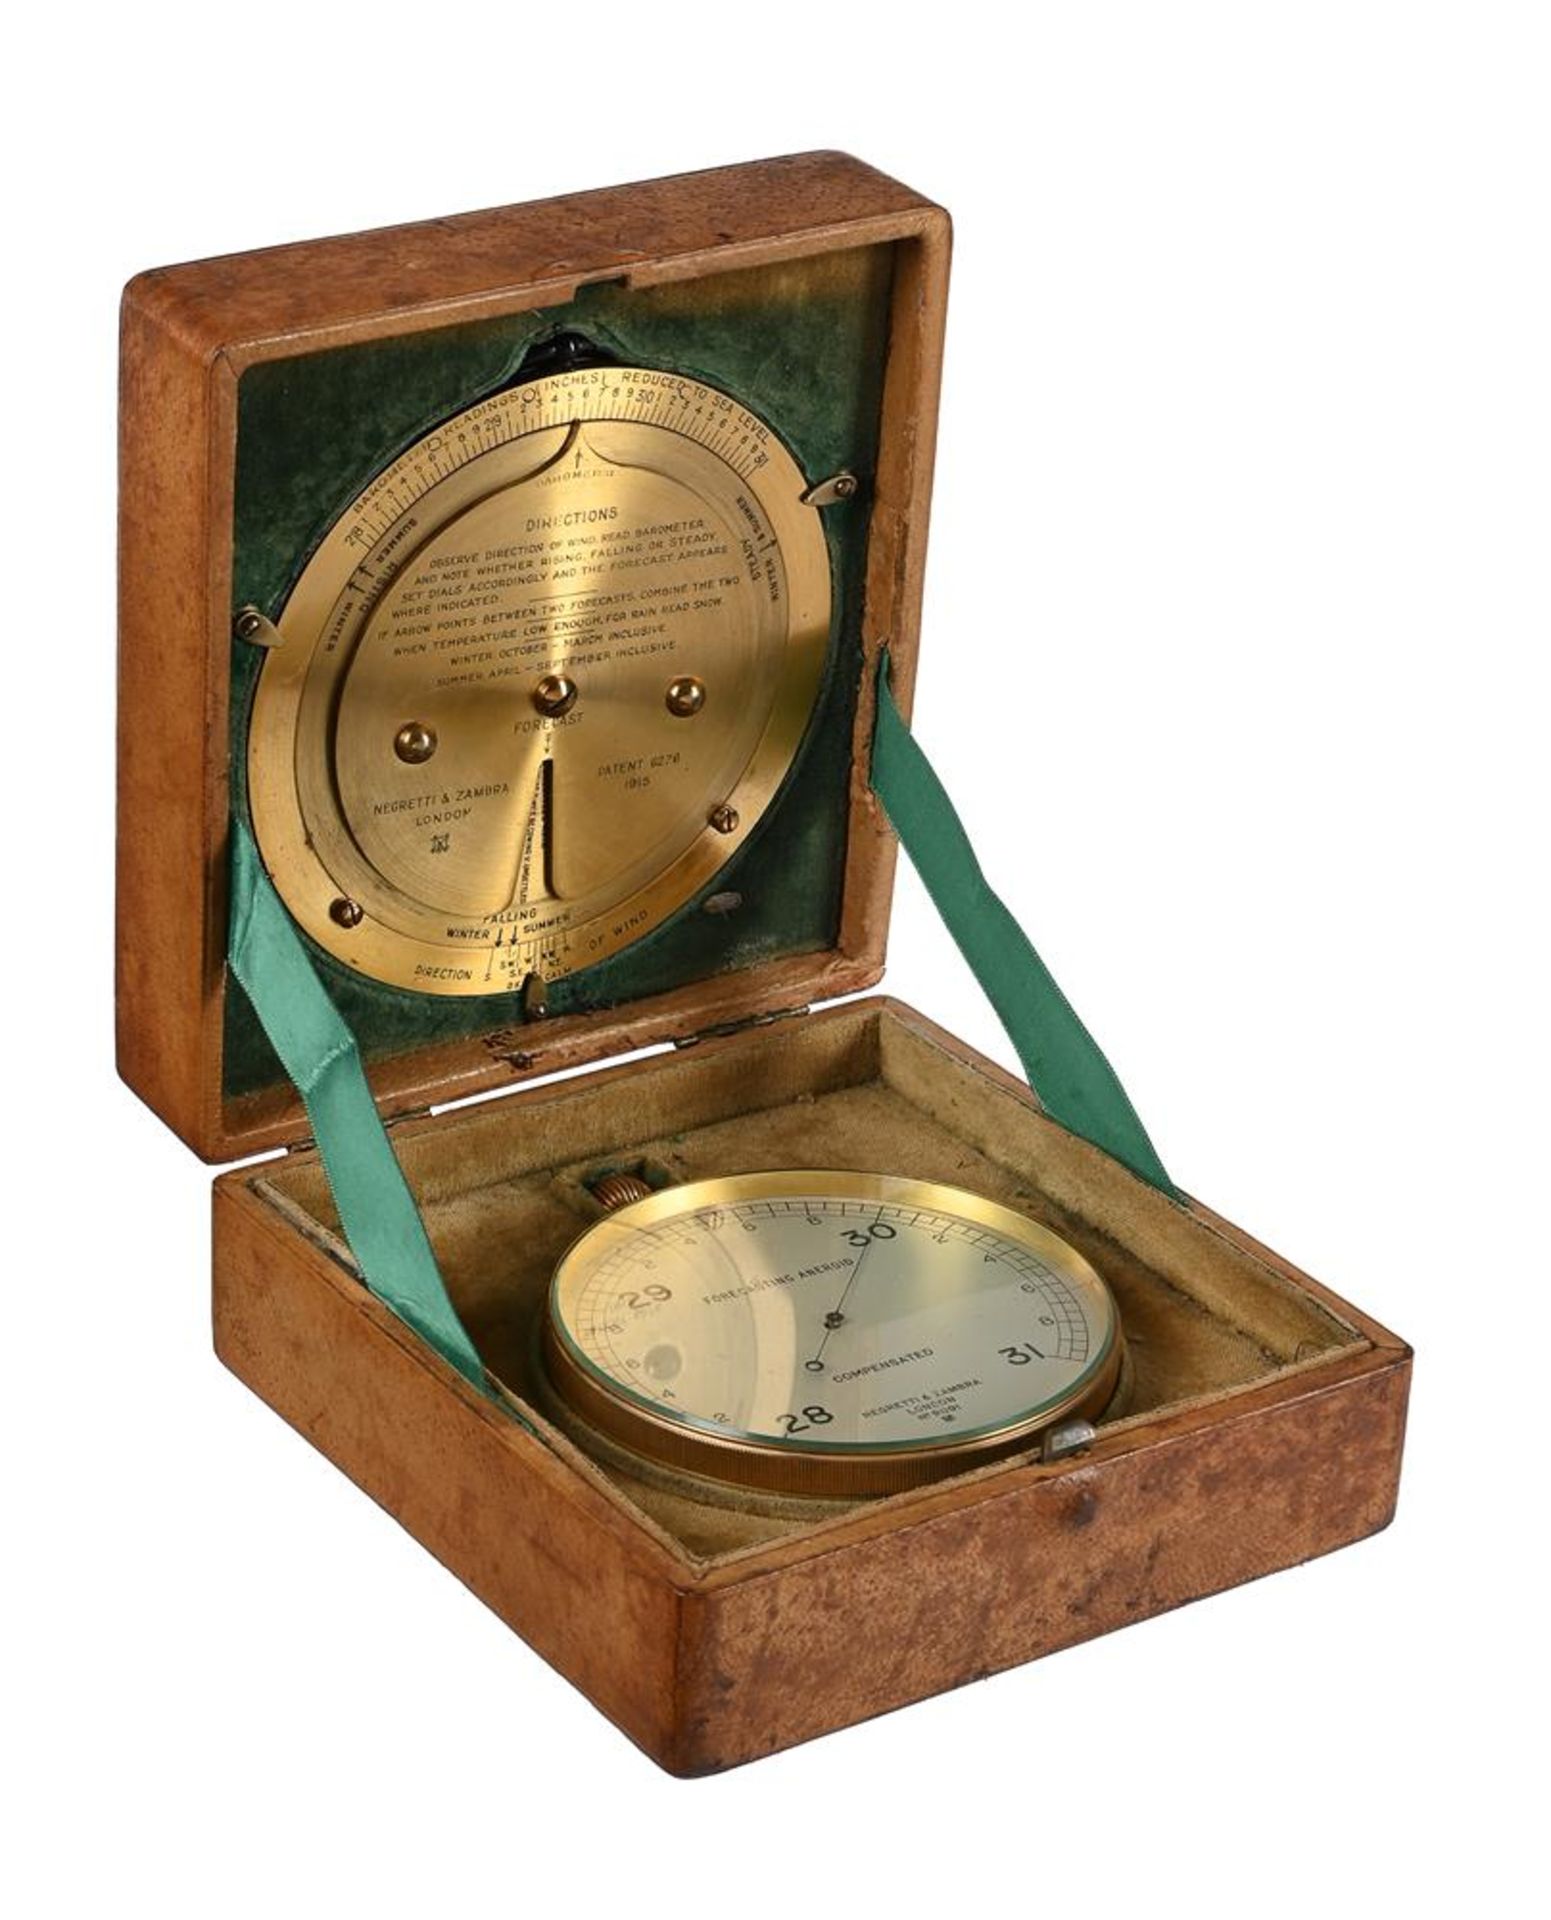 A CASED SET OF ANEROID FORECASTING BAROMETER AND LACQUERED BRASS WEATHER FORECASTING CALCULATOR - Image 3 of 7